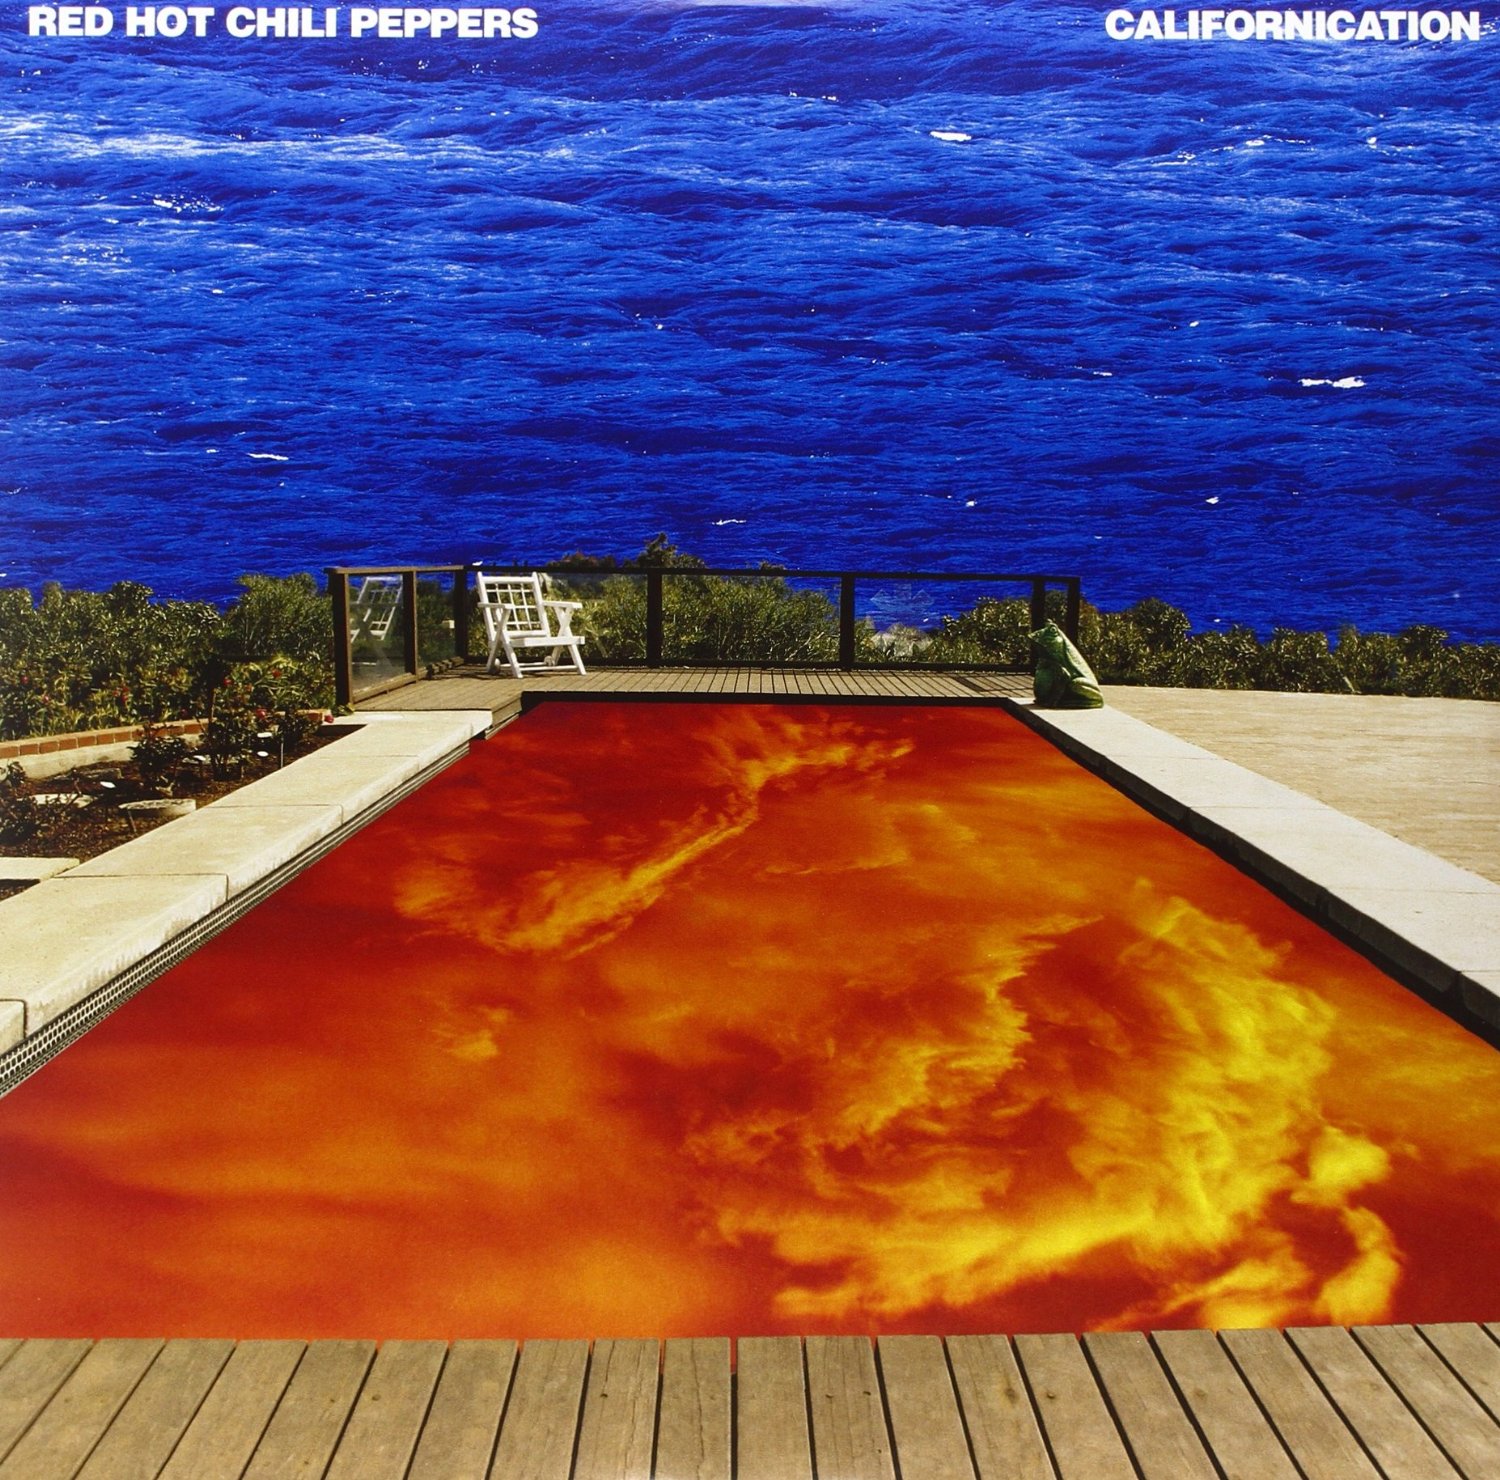 RED HOT CHILI PEPPERS - Californication cover 